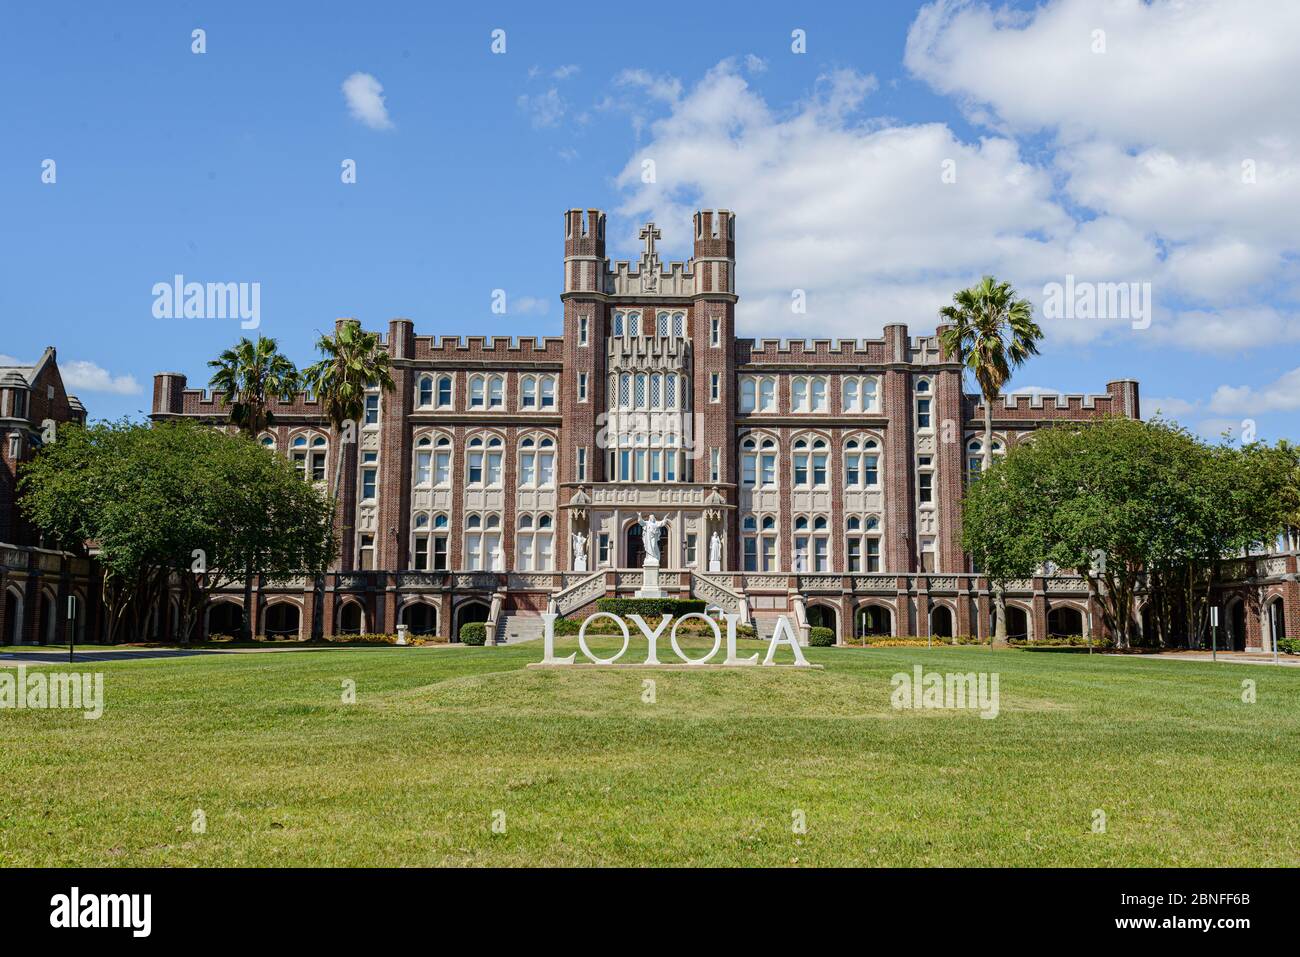 Loyola University administration building and sign on St. Charles Avenue in New Orleans, Louisiana, USA Stock Photo